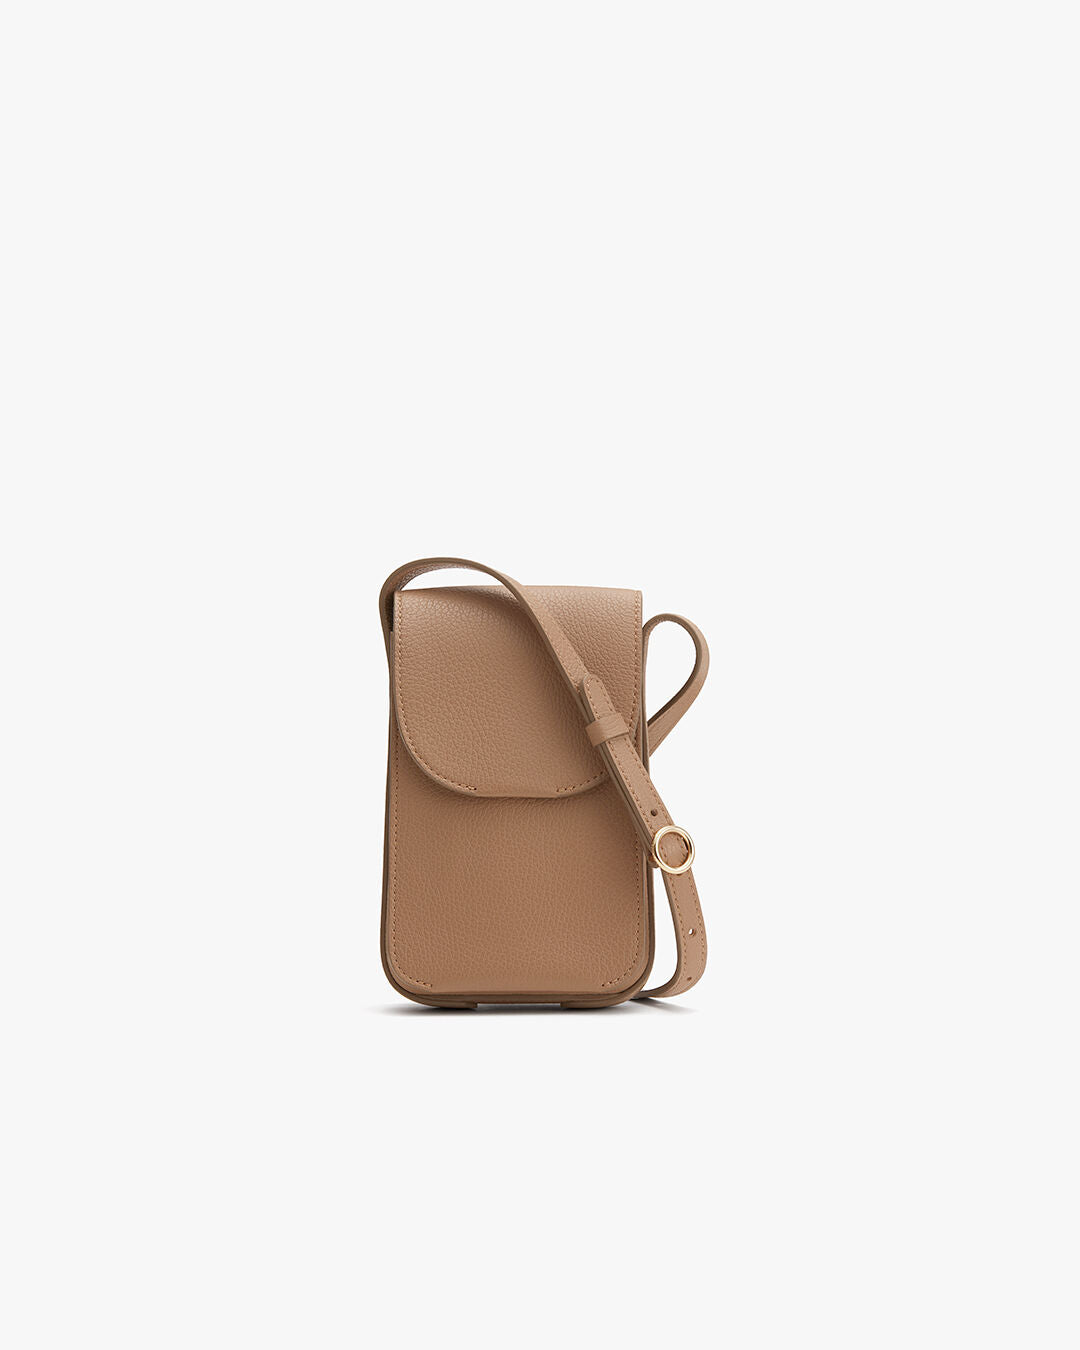 Shop Leather Crossbody Bags | Latico Leathers